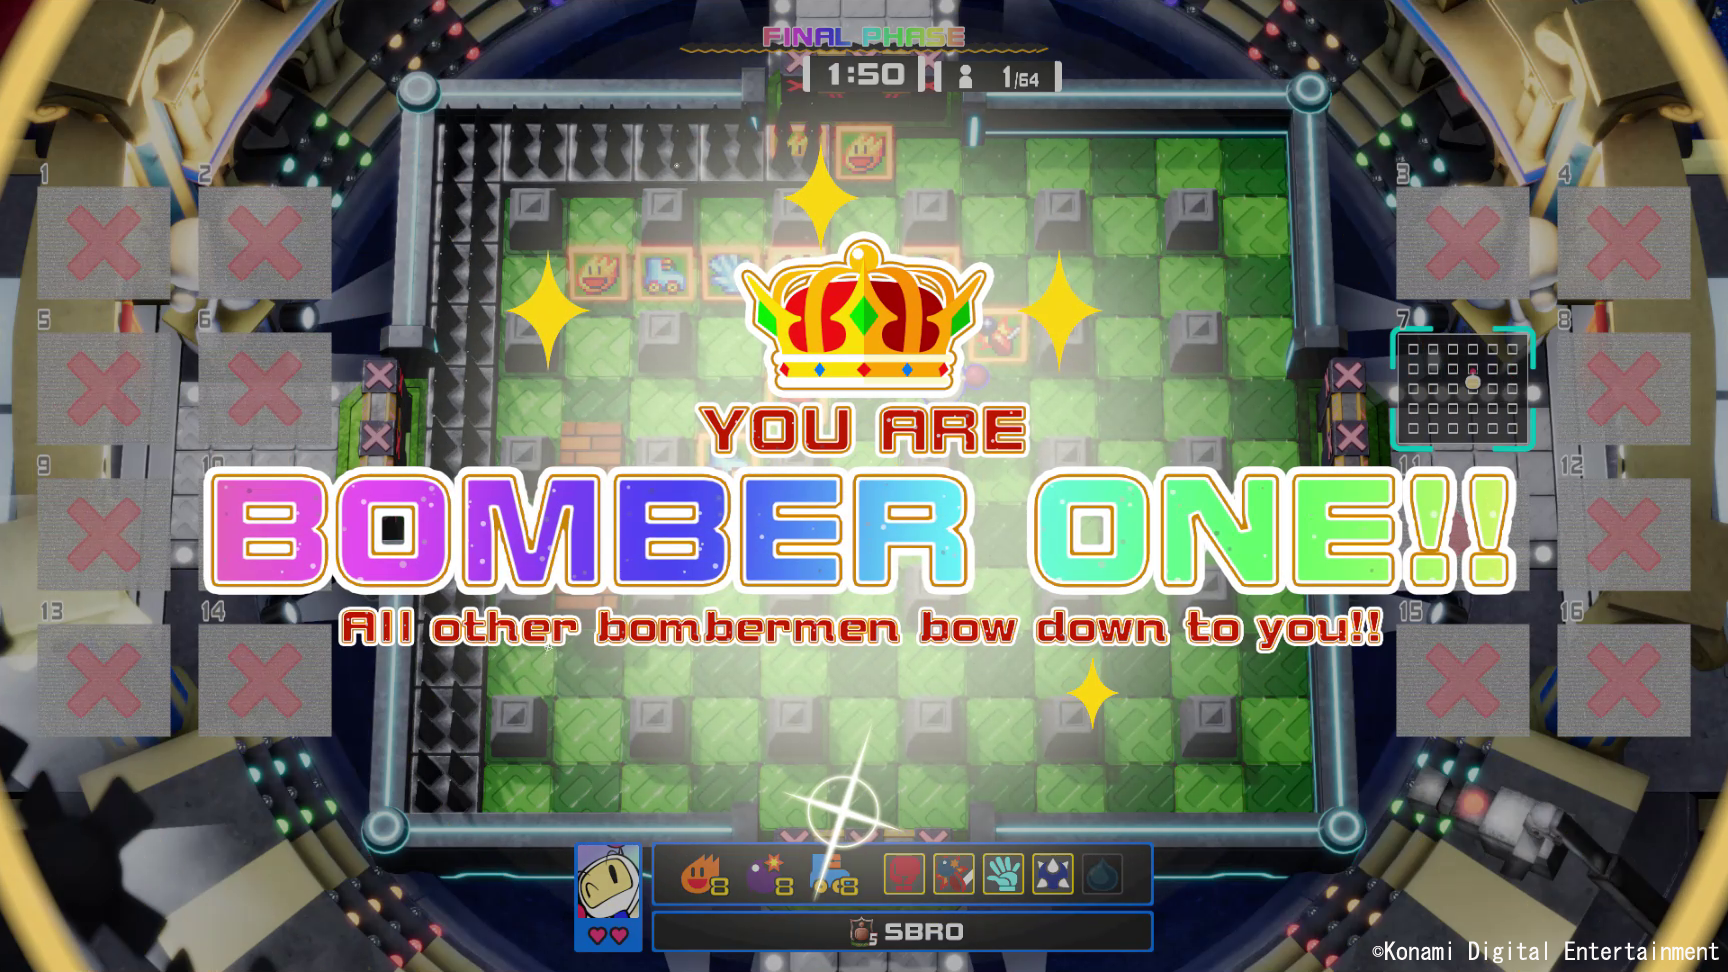 Super Bomberman R Online Heads to PC, Xbox One, Switch, and PS4 as a  Free-to-Play Game - Niche Gamer